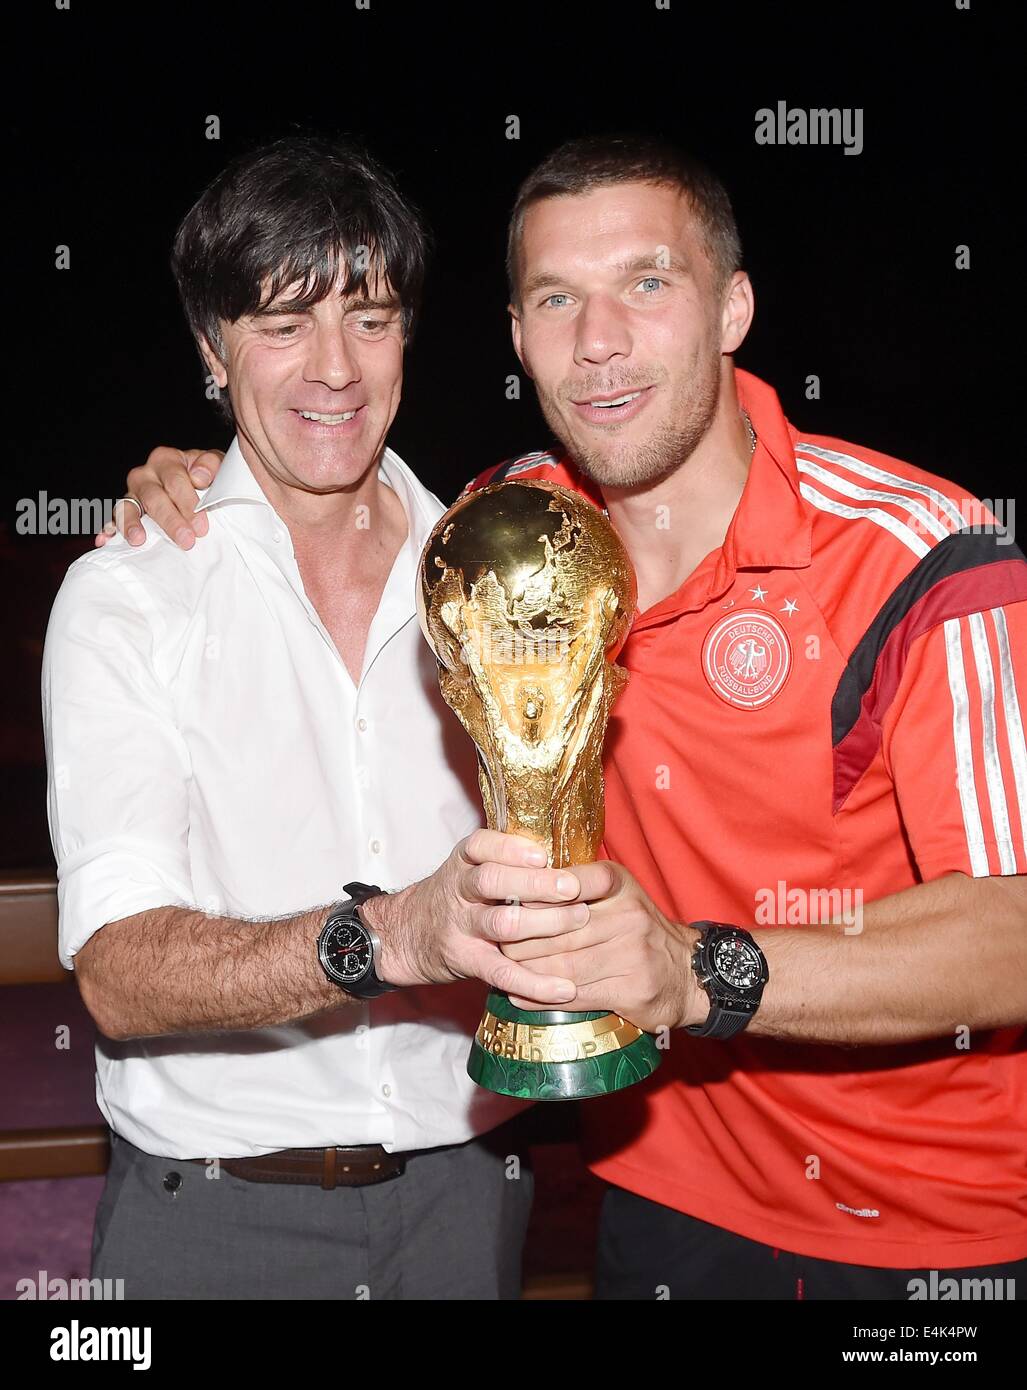 Handout: Rio de Janeiro, Brazil. 14th July, 2014. German coach Joachim Loew (L) and Lukas Podolski celebrating the victory in the Soccer World Cup with the trophy at Hotel Sheraton in Rio De Janeiro, Brazil on 13 July 2014. Germany won 1-0 against Argentina in the FIFA World Cup 2014 Final match. (: Image for in connection with the current reporting on the World Cup and together with the source: Foto: Markus Gilliar/DFB/dpa.) Credit:  dpa picture alliance/Alamy Live News Stock Photo